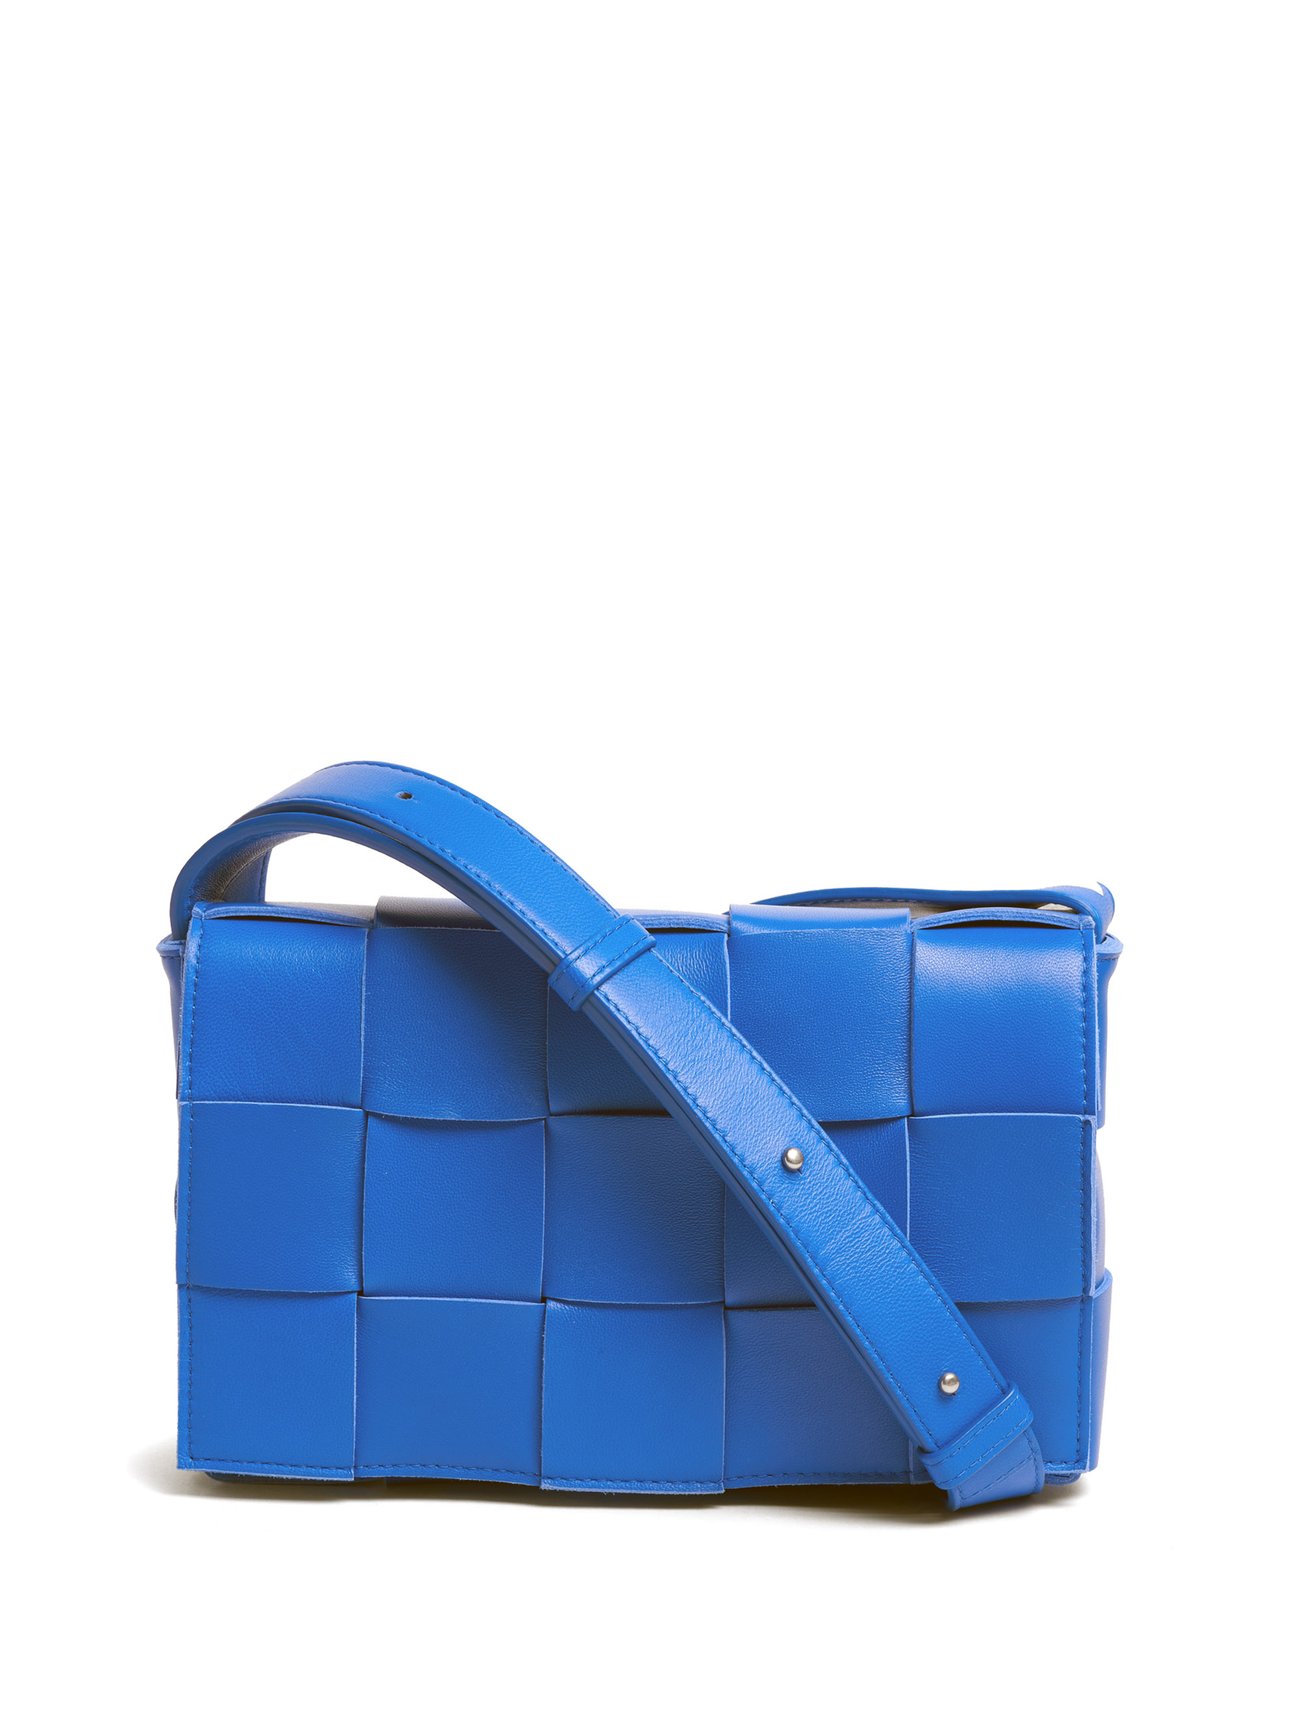 BOTTEGA VENETA Cassette small Intrecciato-leather cross-body bag comes in cerulean blue. It has an adjustable wide cross body strap, front flap and a woven leather front. 